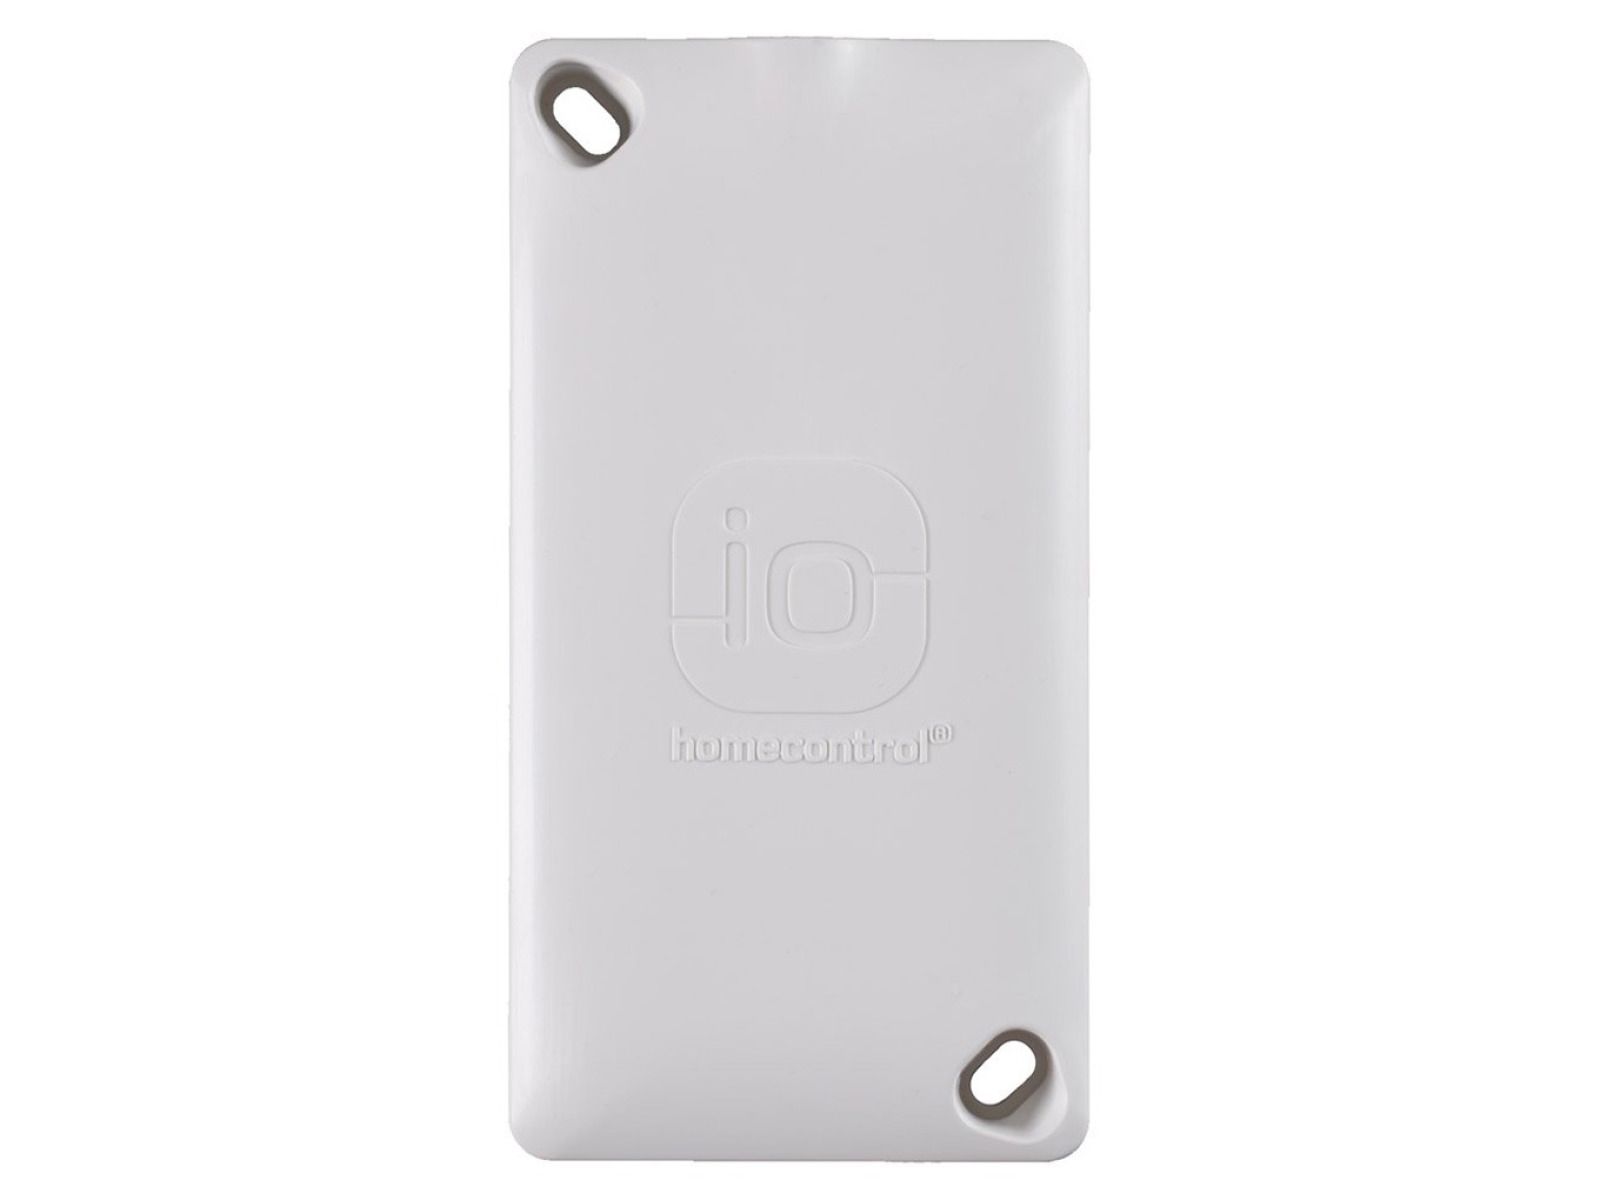 Accessoires_connectivite_interfacecosytouch_450251_thermor